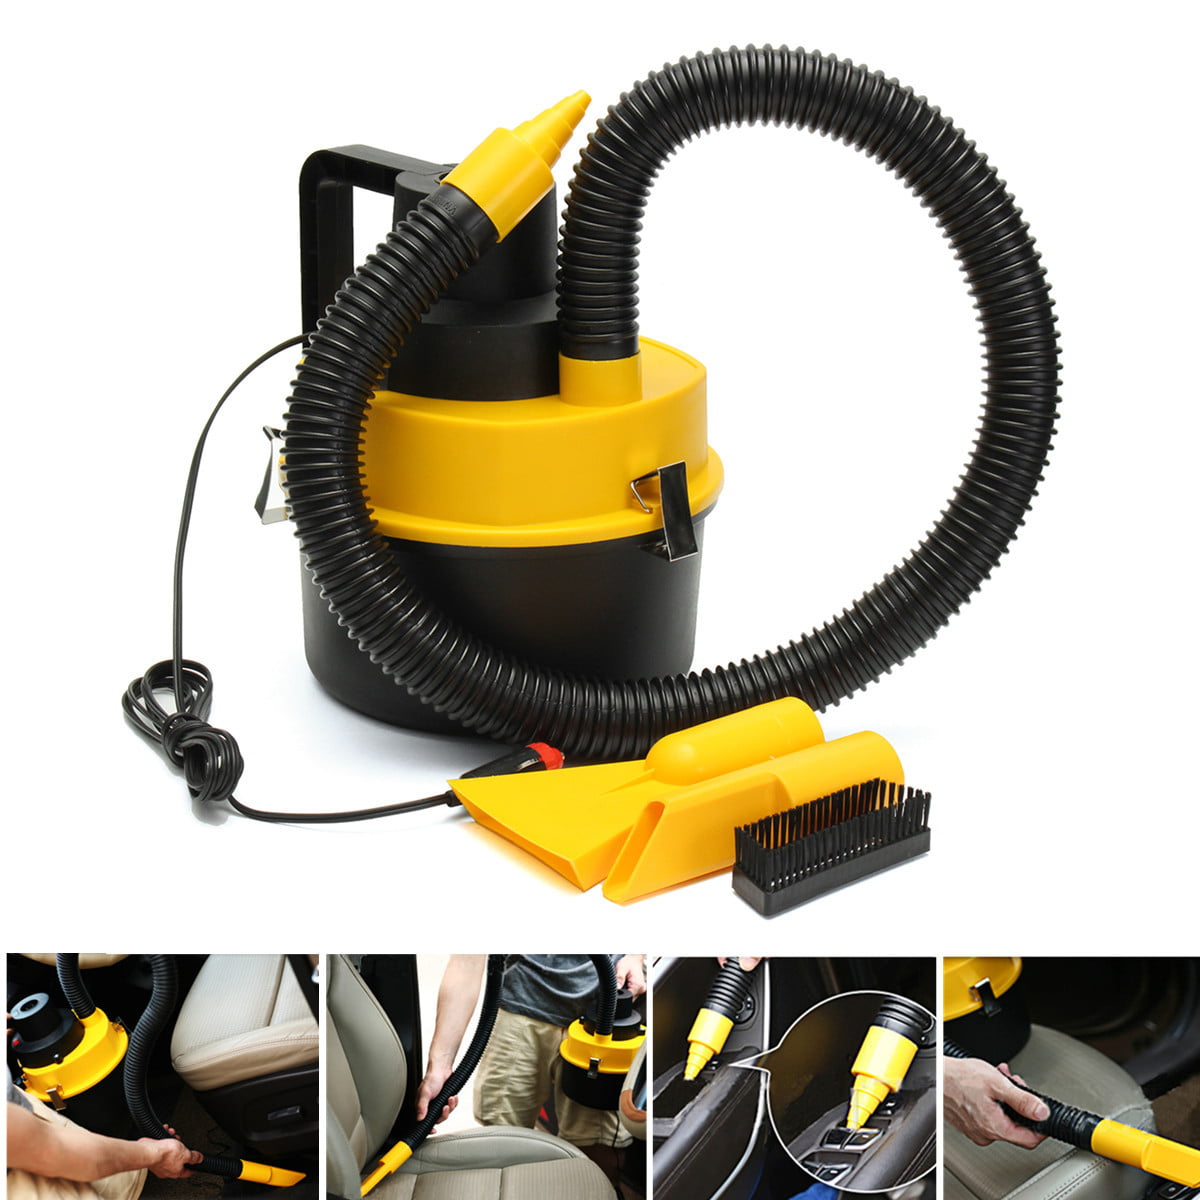 AMZFDC Wet Dry Vac Vacuum Cleaner 12V Wet Dry Vac Vacuum Cleaner Inflator Portable Turbo Hand Held for Car Small Shop Vacuum Cleaner 